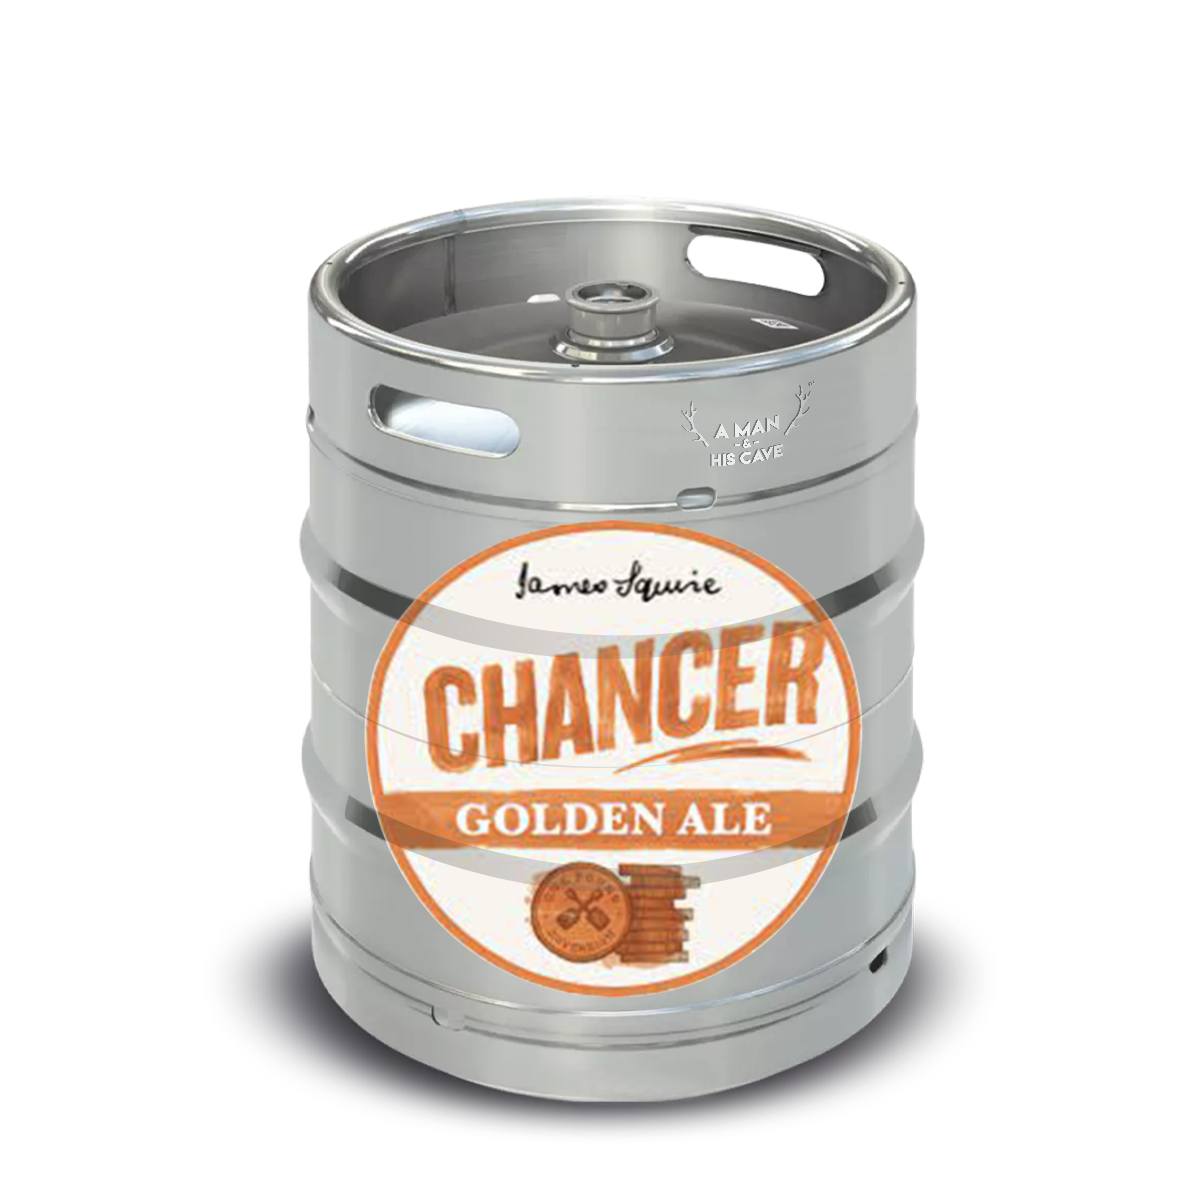 Beer Keg - James Squire The Chancer Golden Ale 50LT Commercial Keg 4.2% A-Type Coupler [NSW]